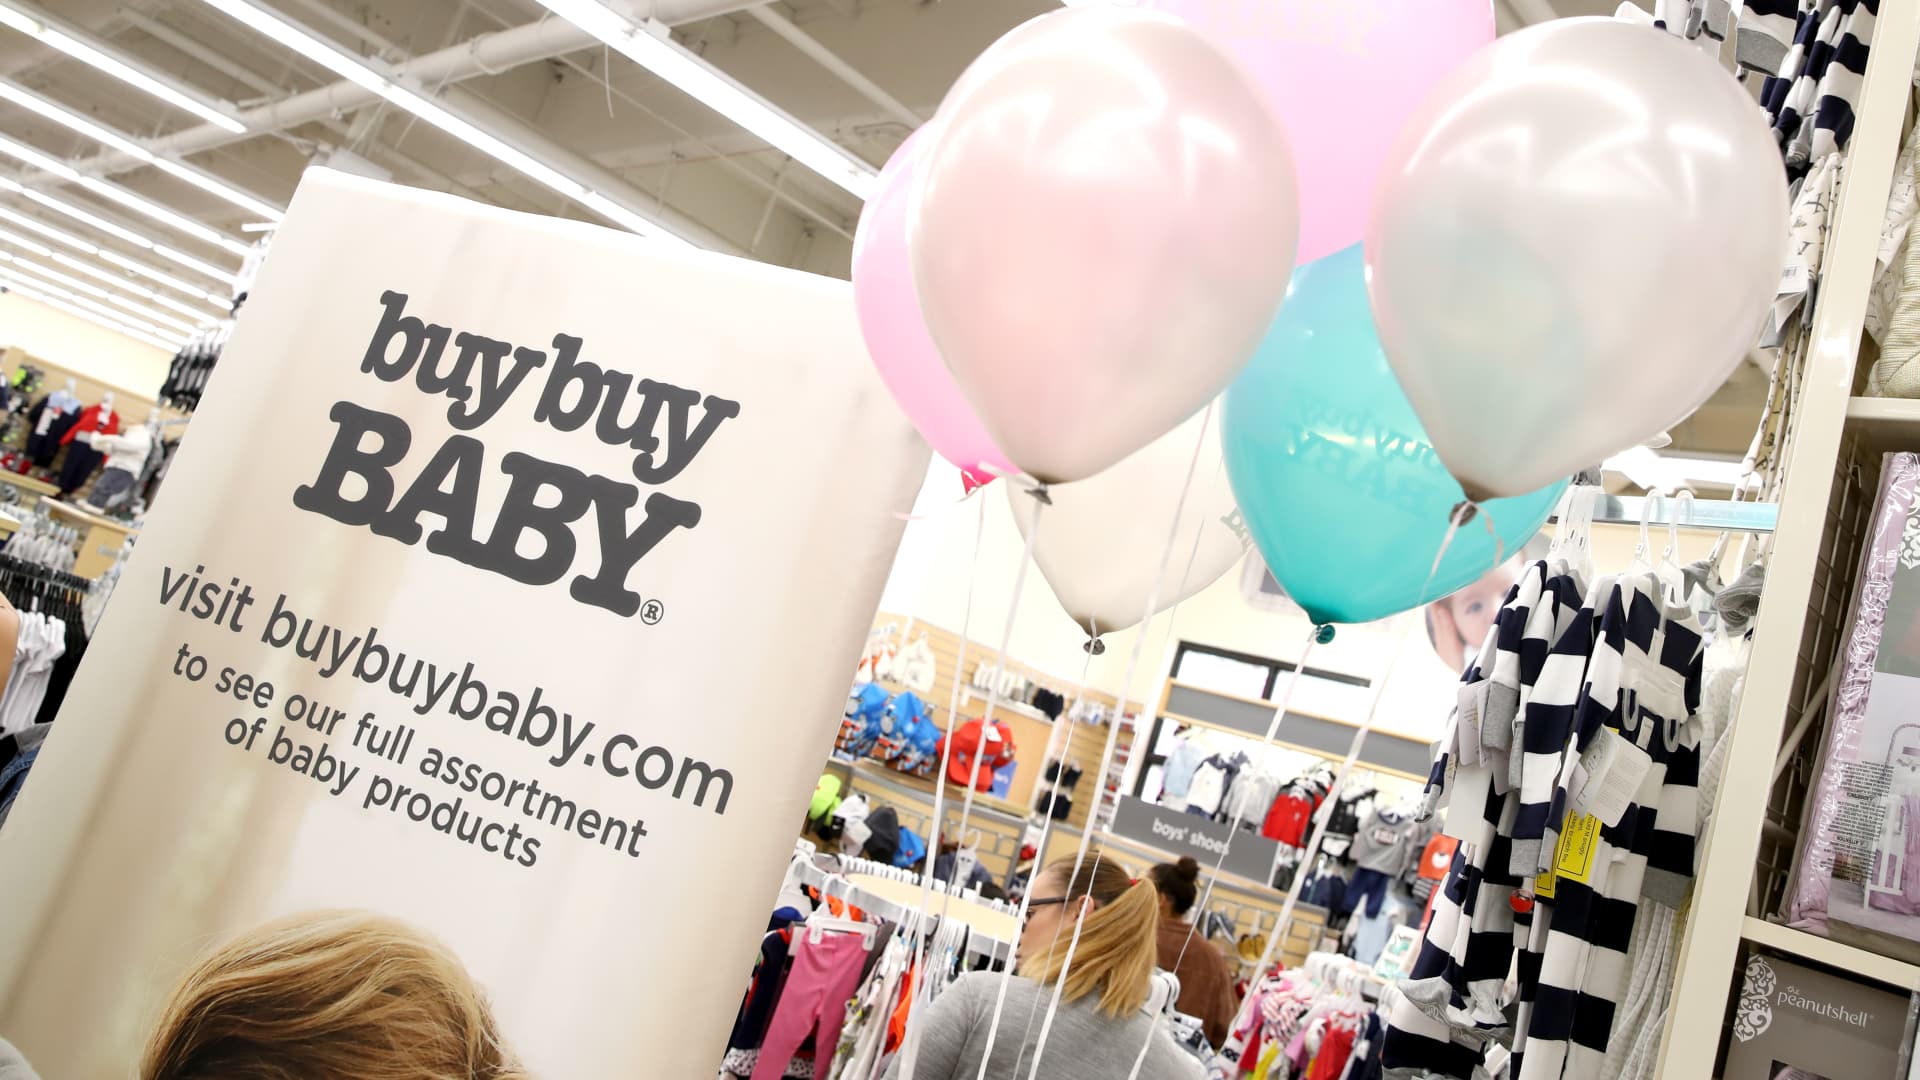 Bed Bath & Beyond stock jumps on report company received bids for Buybuy Baby unit